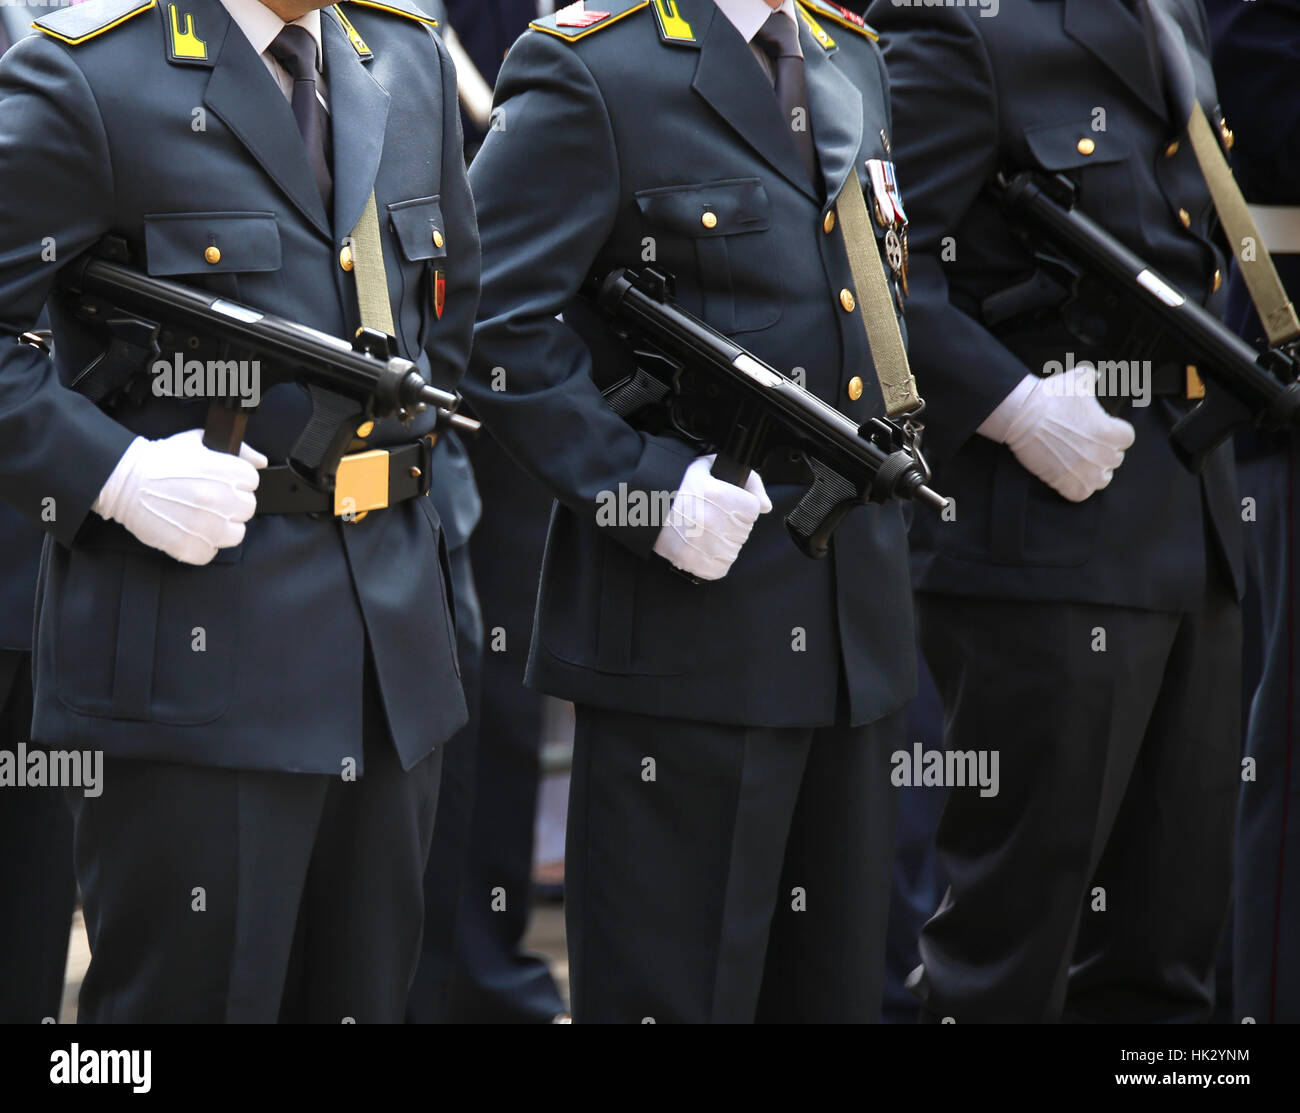 officers of the financial italian police called Guardia di Finanza with  parade uniform and machine guns during the celebration of June 2, the  Italian Stock Photo - Alamy